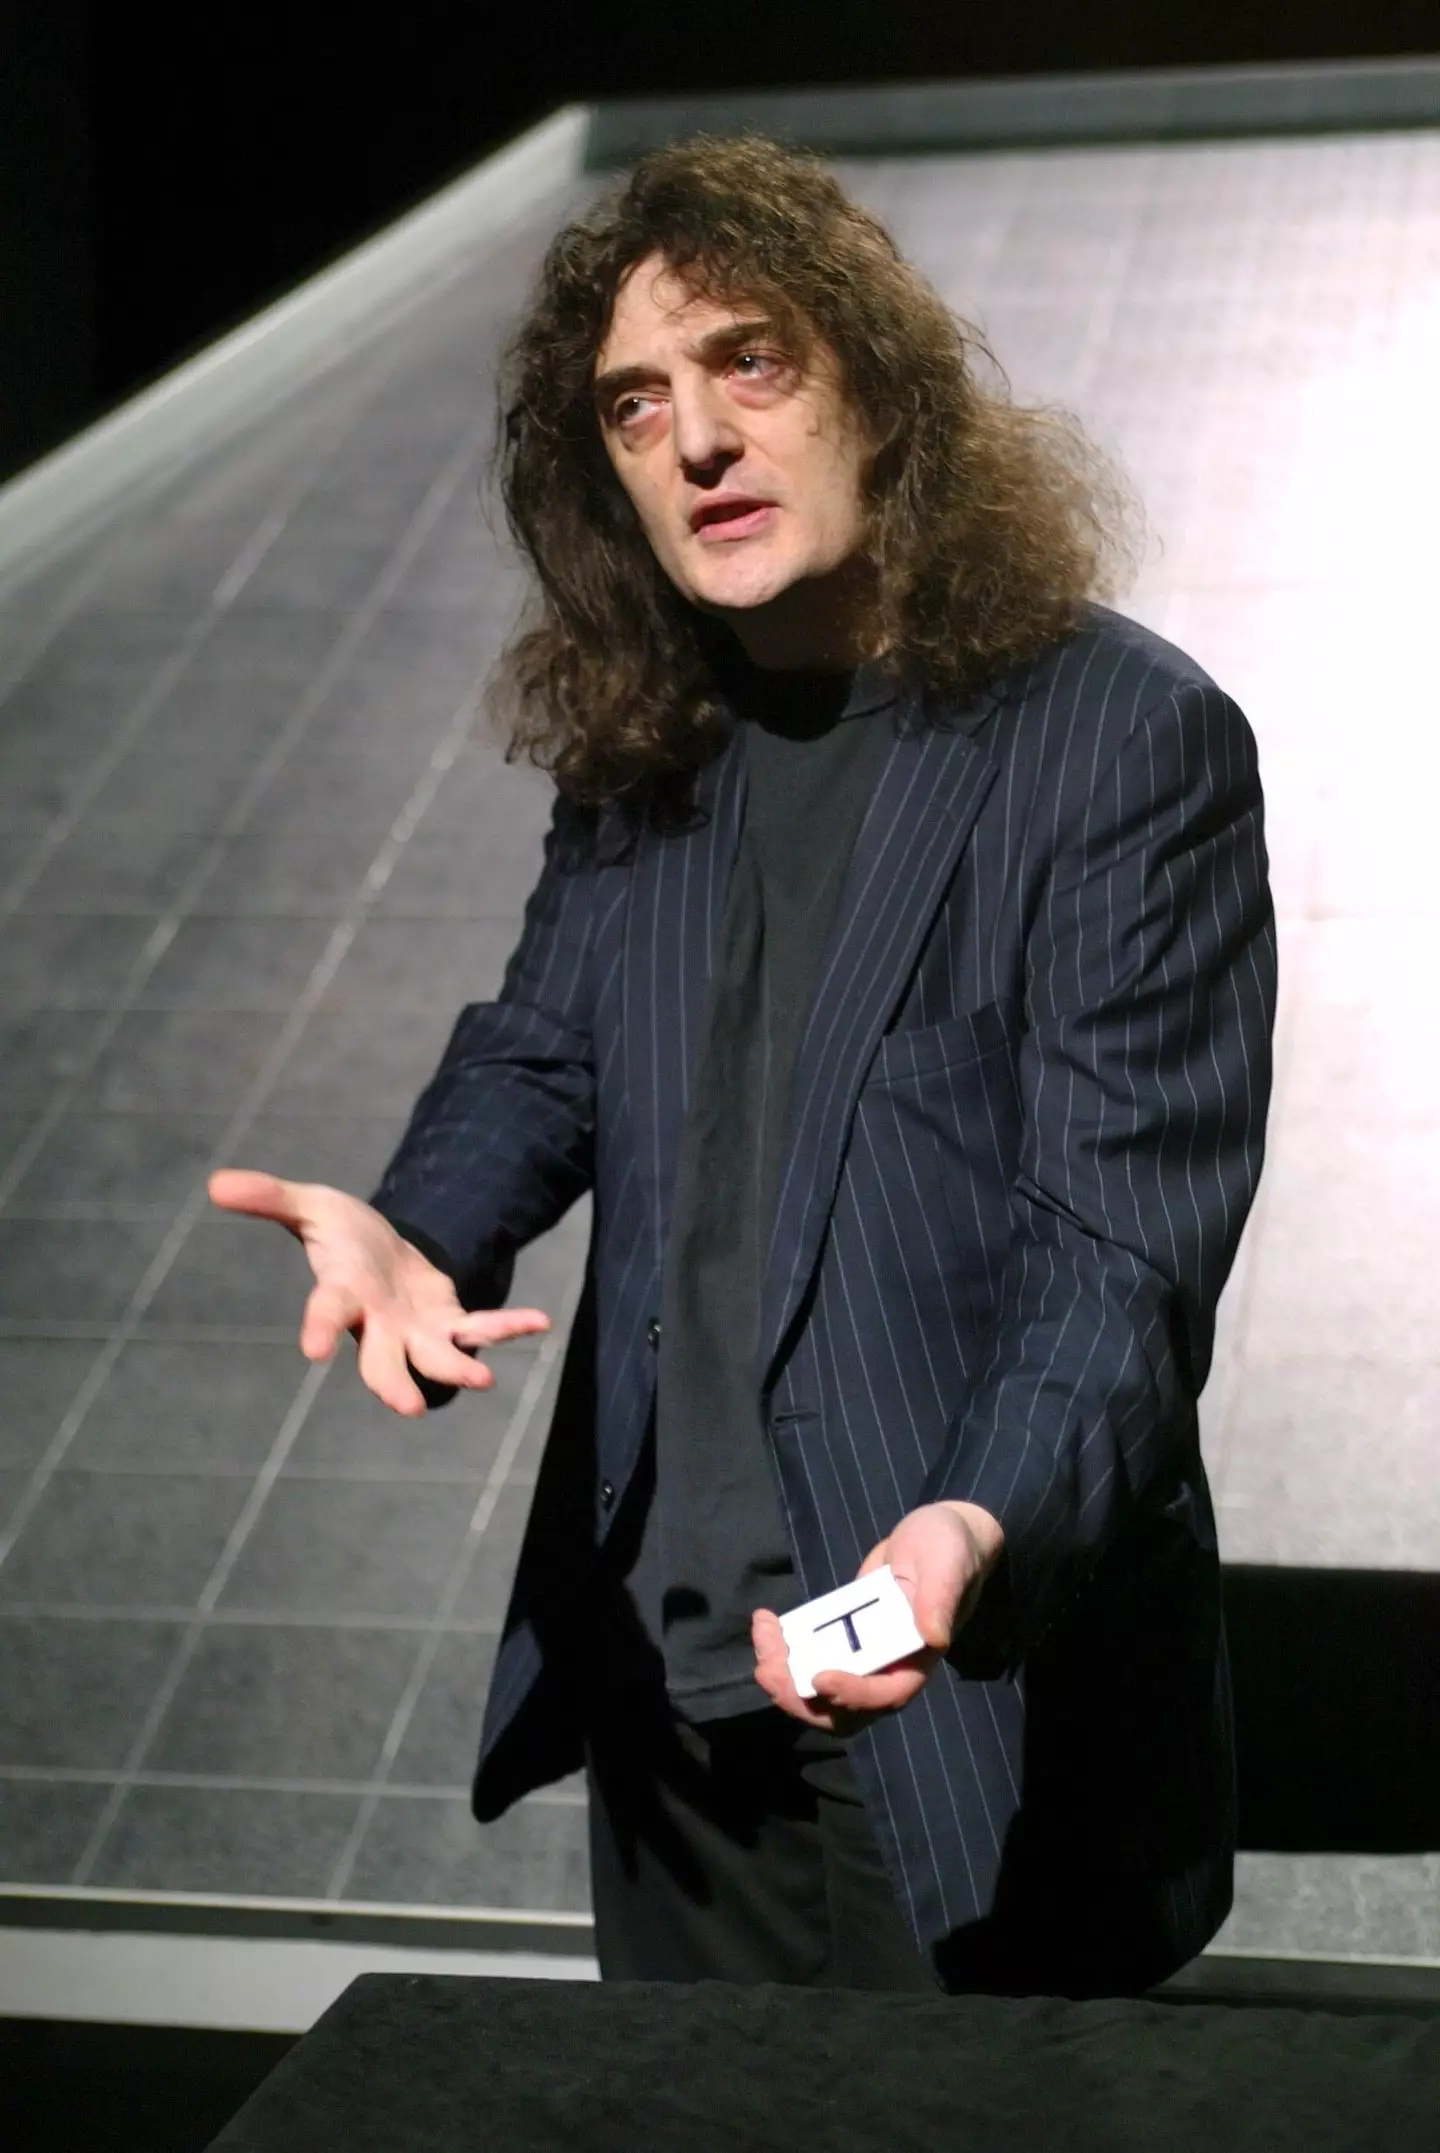 Jerry Sadowitz has defended his comedy performance.